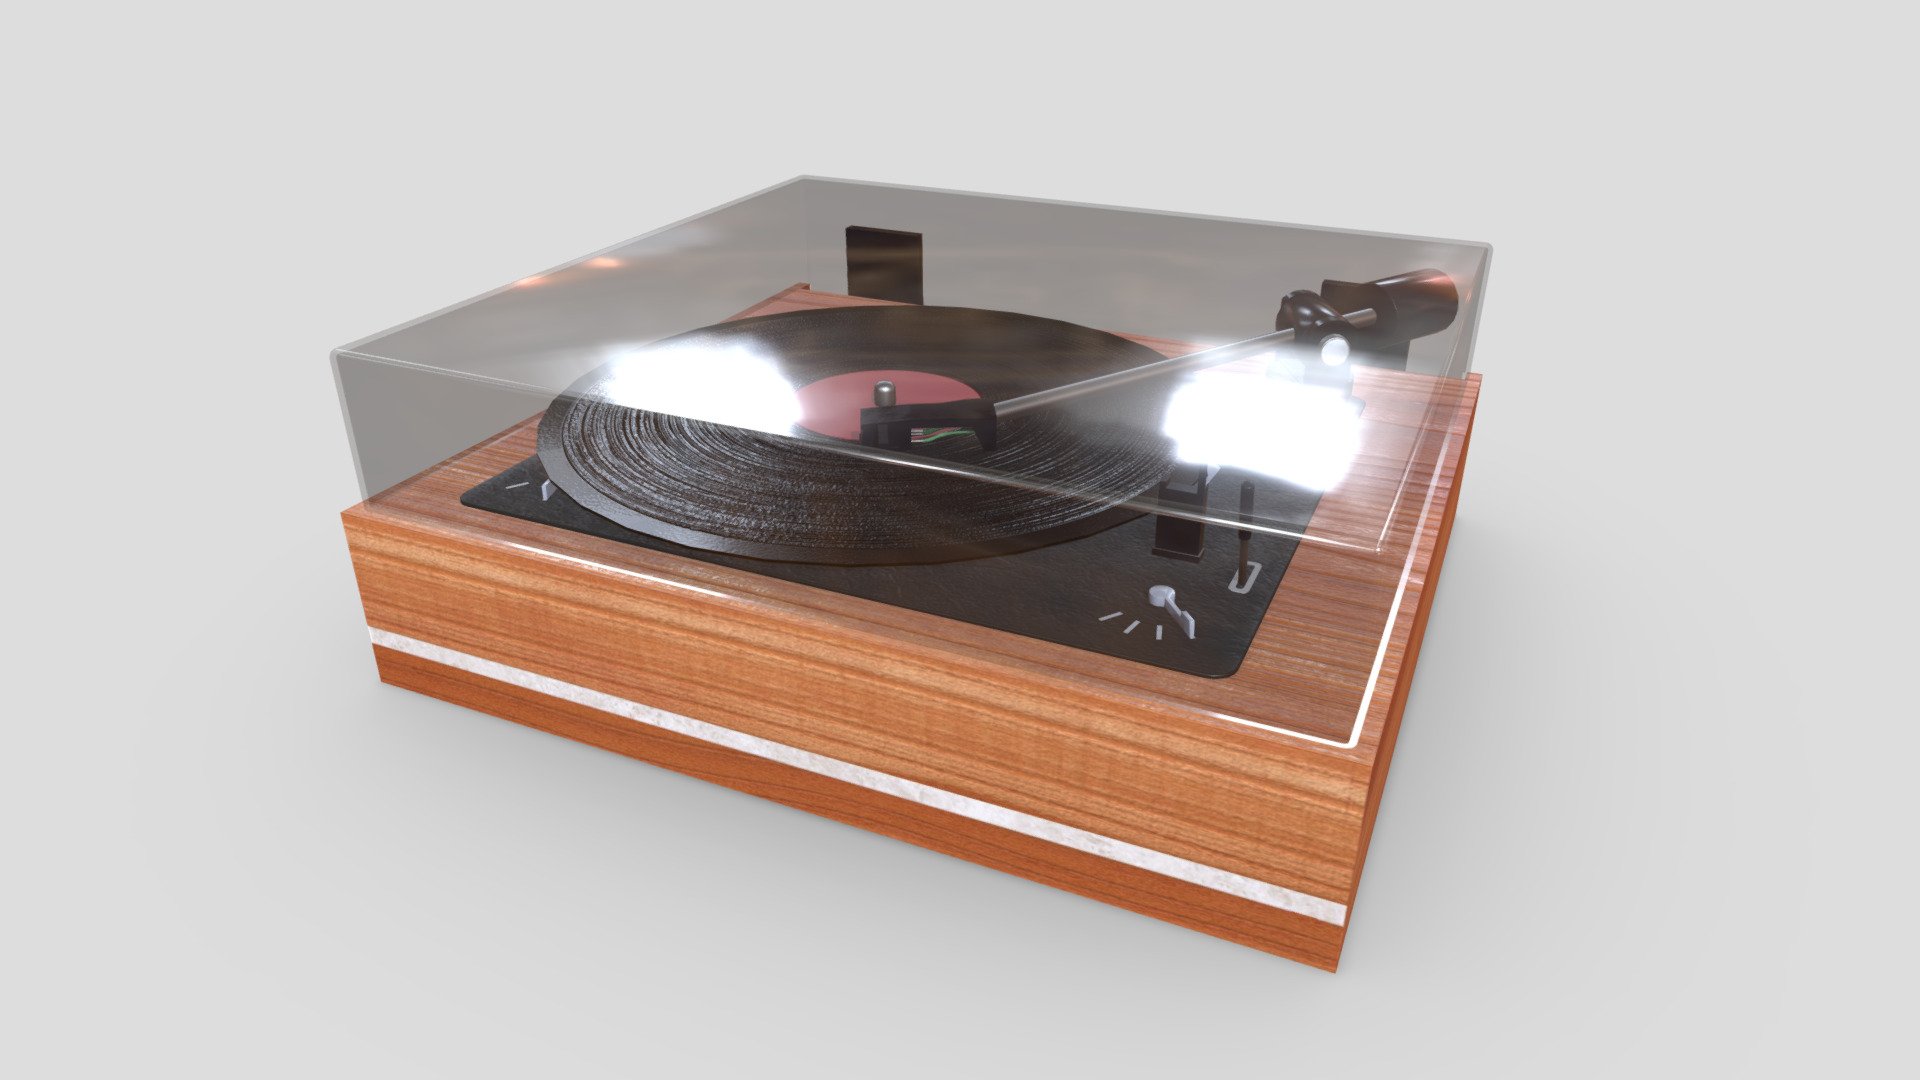 low poly 3d model of classic record player - Record player for vinyls - Buy Royalty Free 3D model by assetfactory 3d model